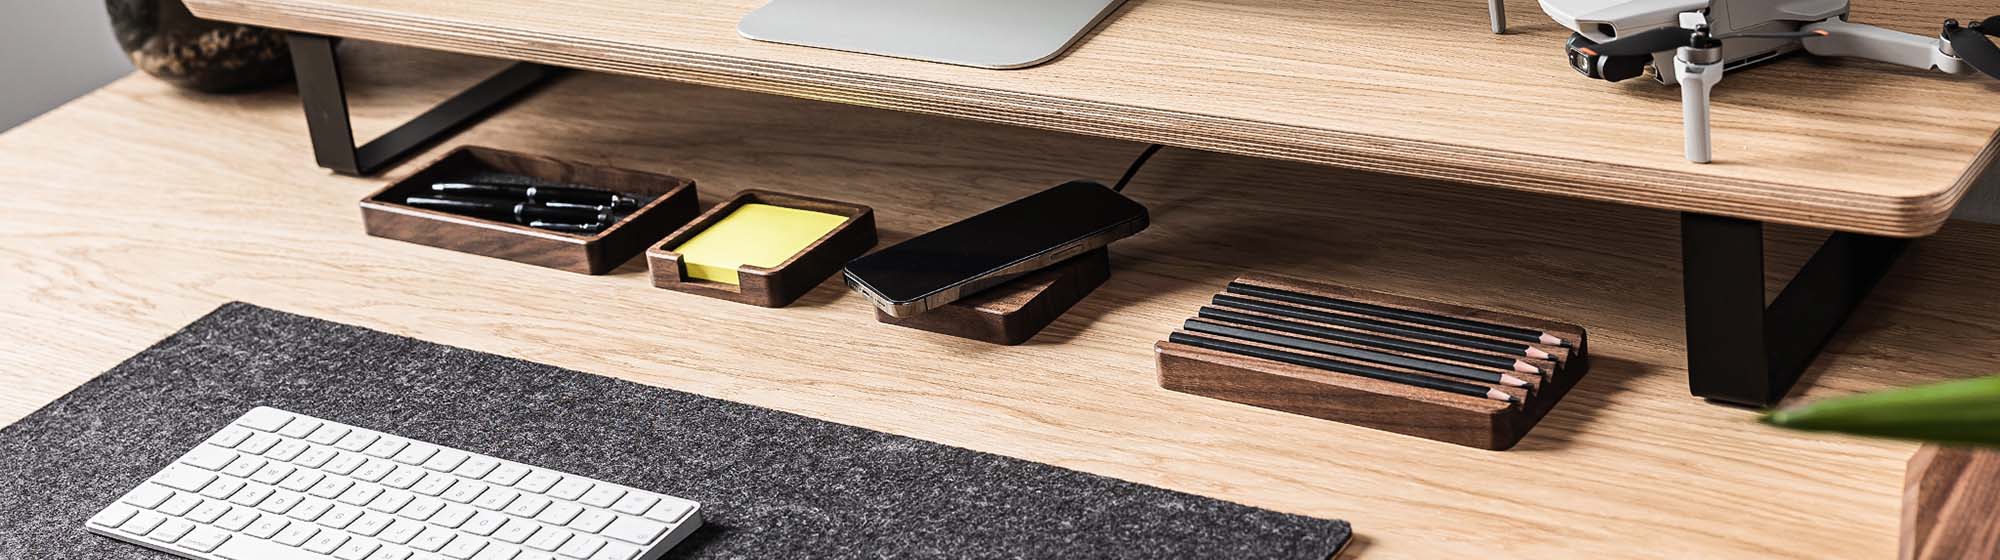 Square Organizer Chargers